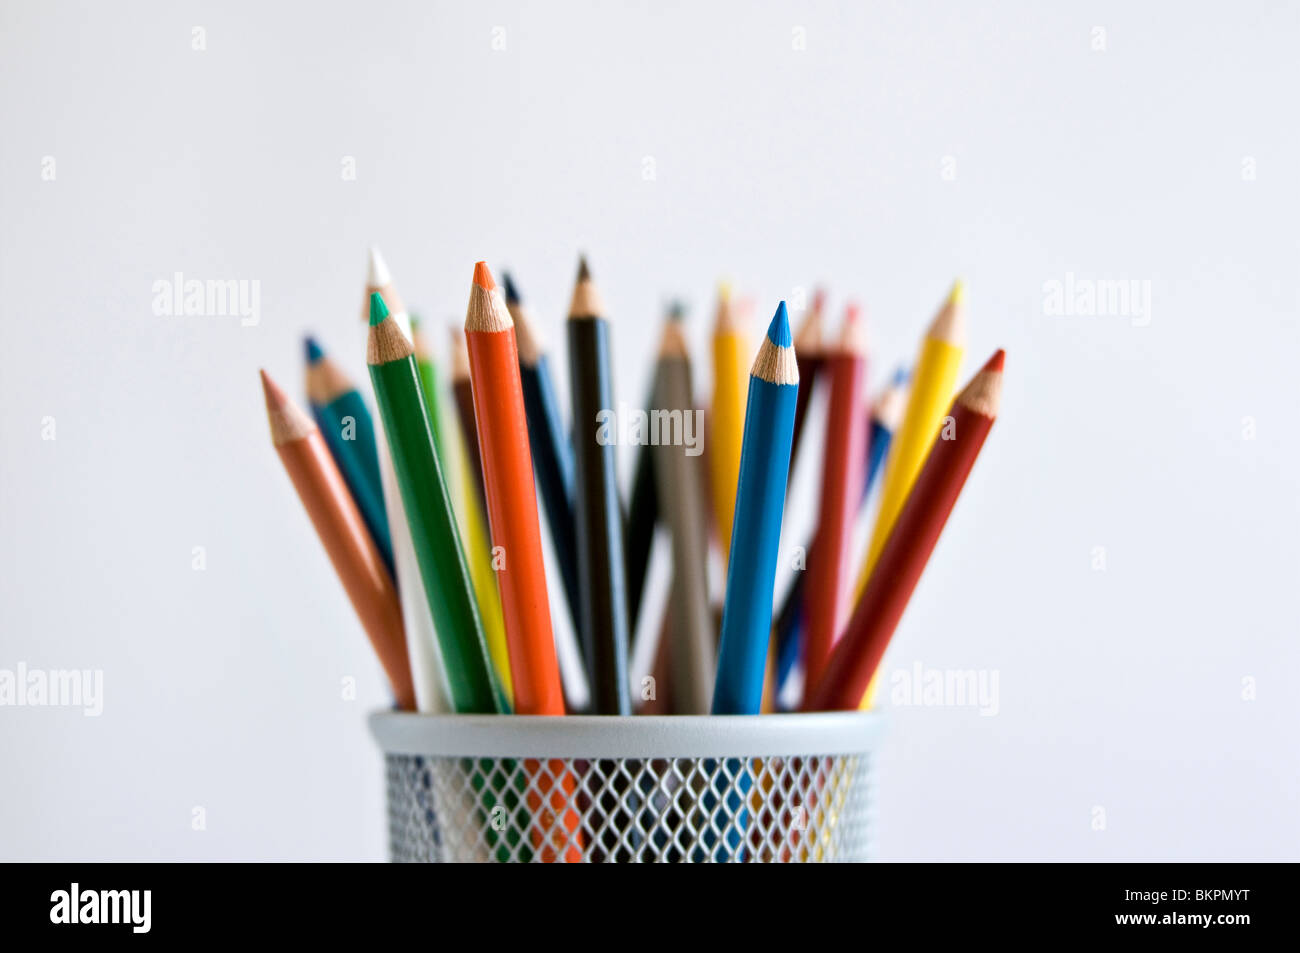 Colored art pencils in pencil holder, on white background. Stock Photo